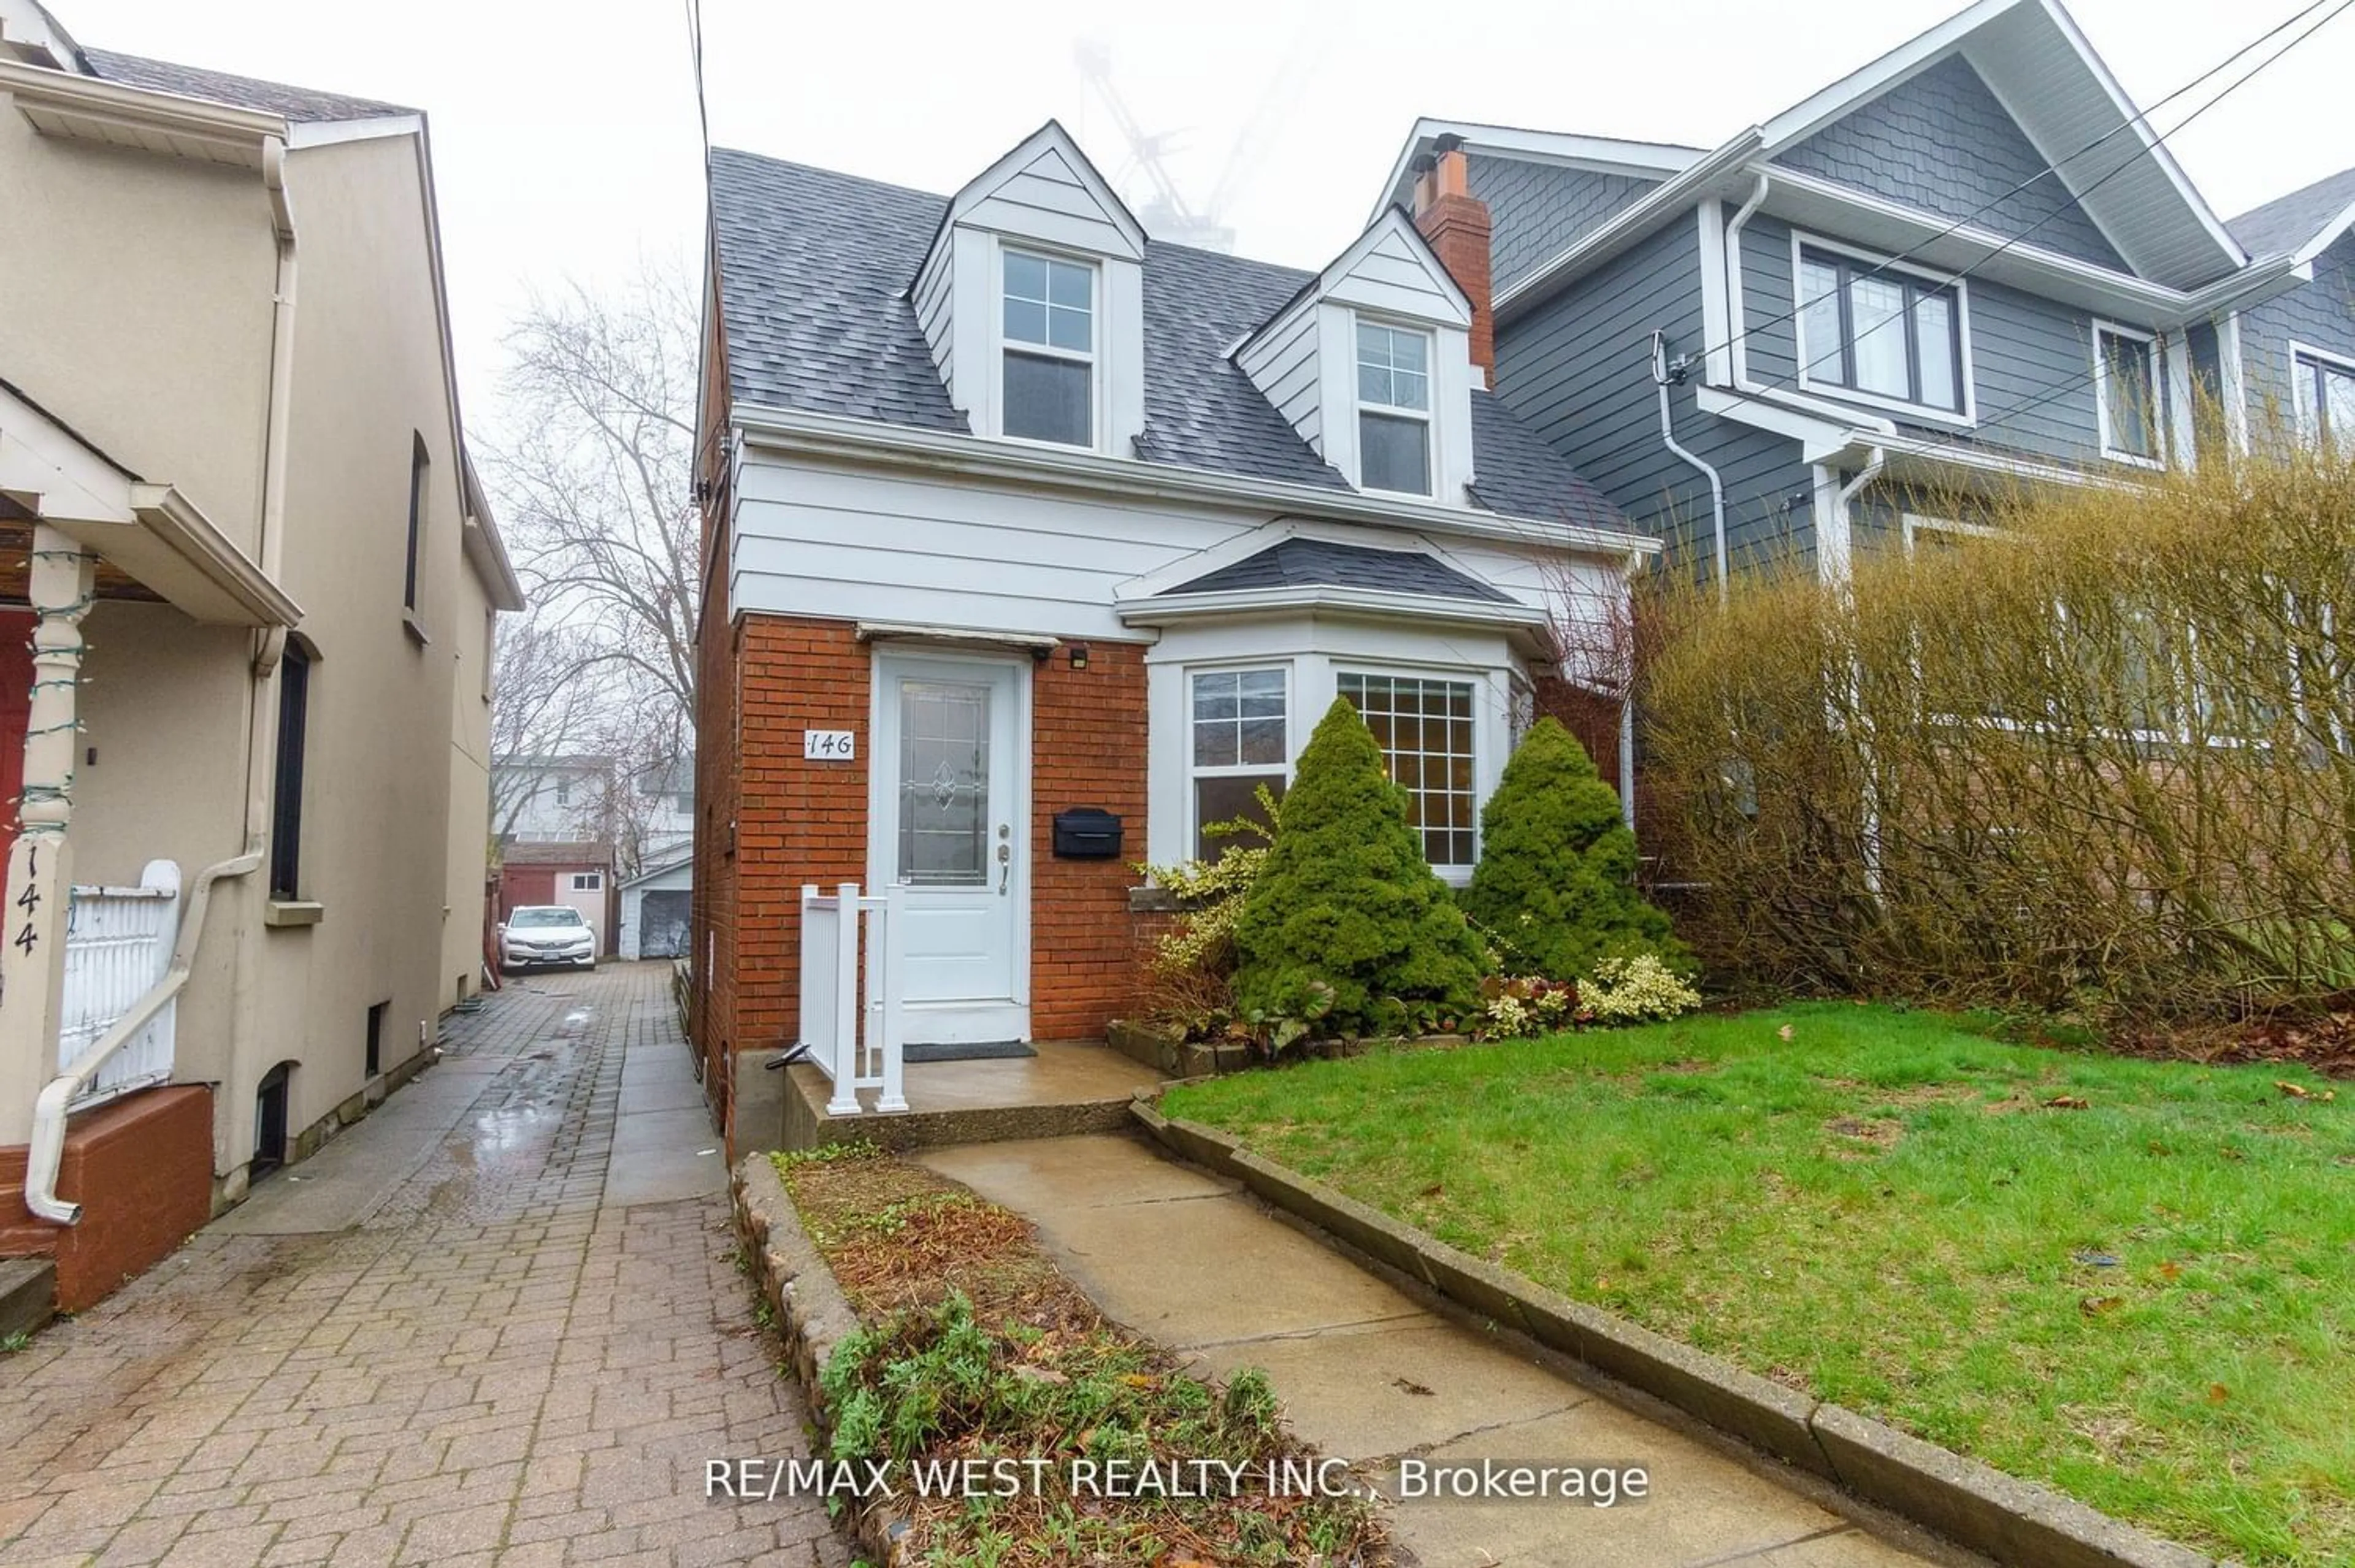 A pic from exterior of the house or condo for 146 Fallingbrook Rd, Toronto Ontario M1N 2T6